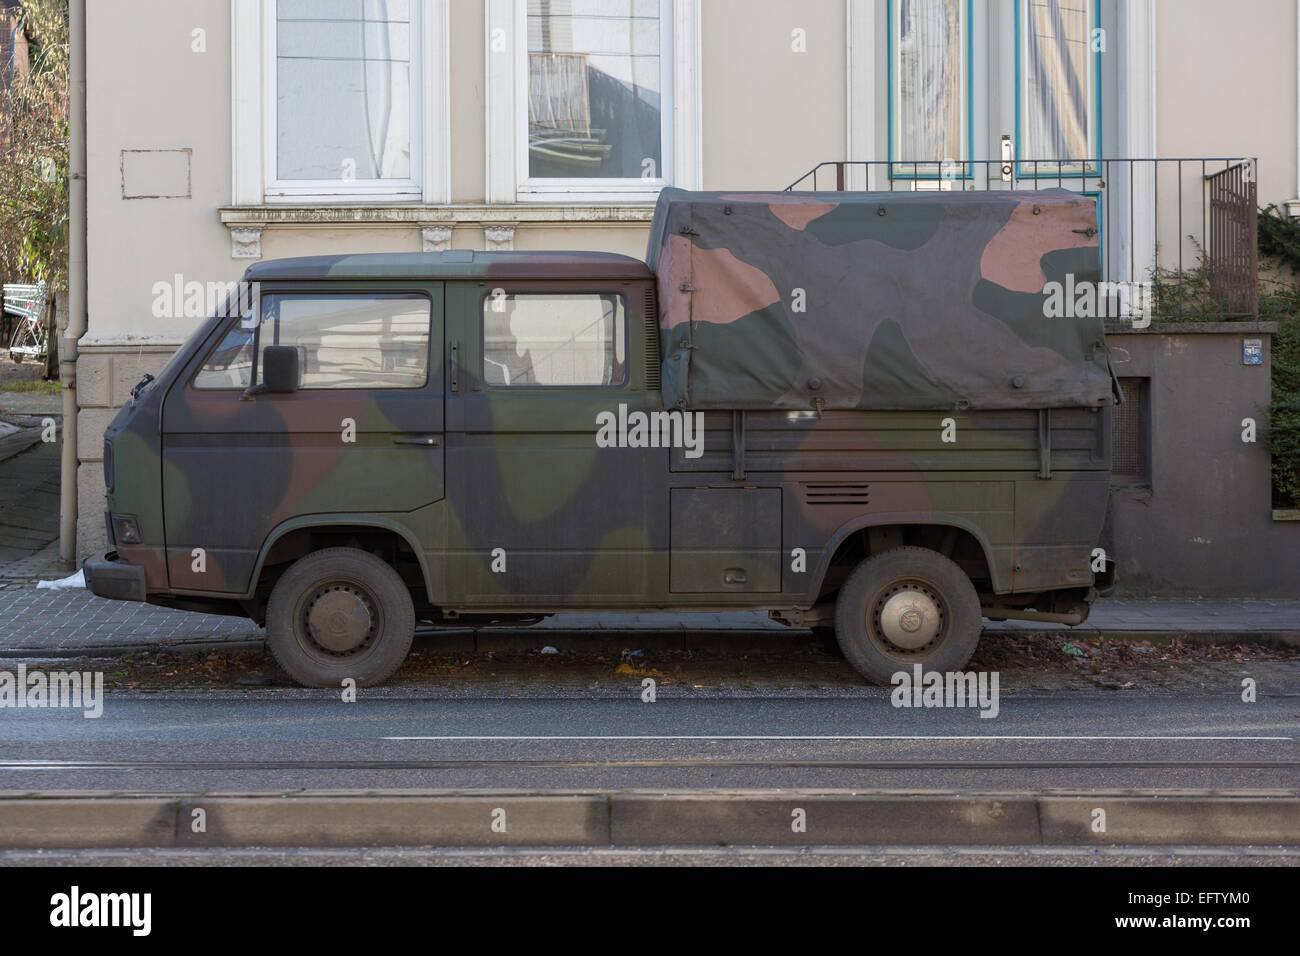 An ex-German military camouflaged vehicle parked in a street Stock Photo